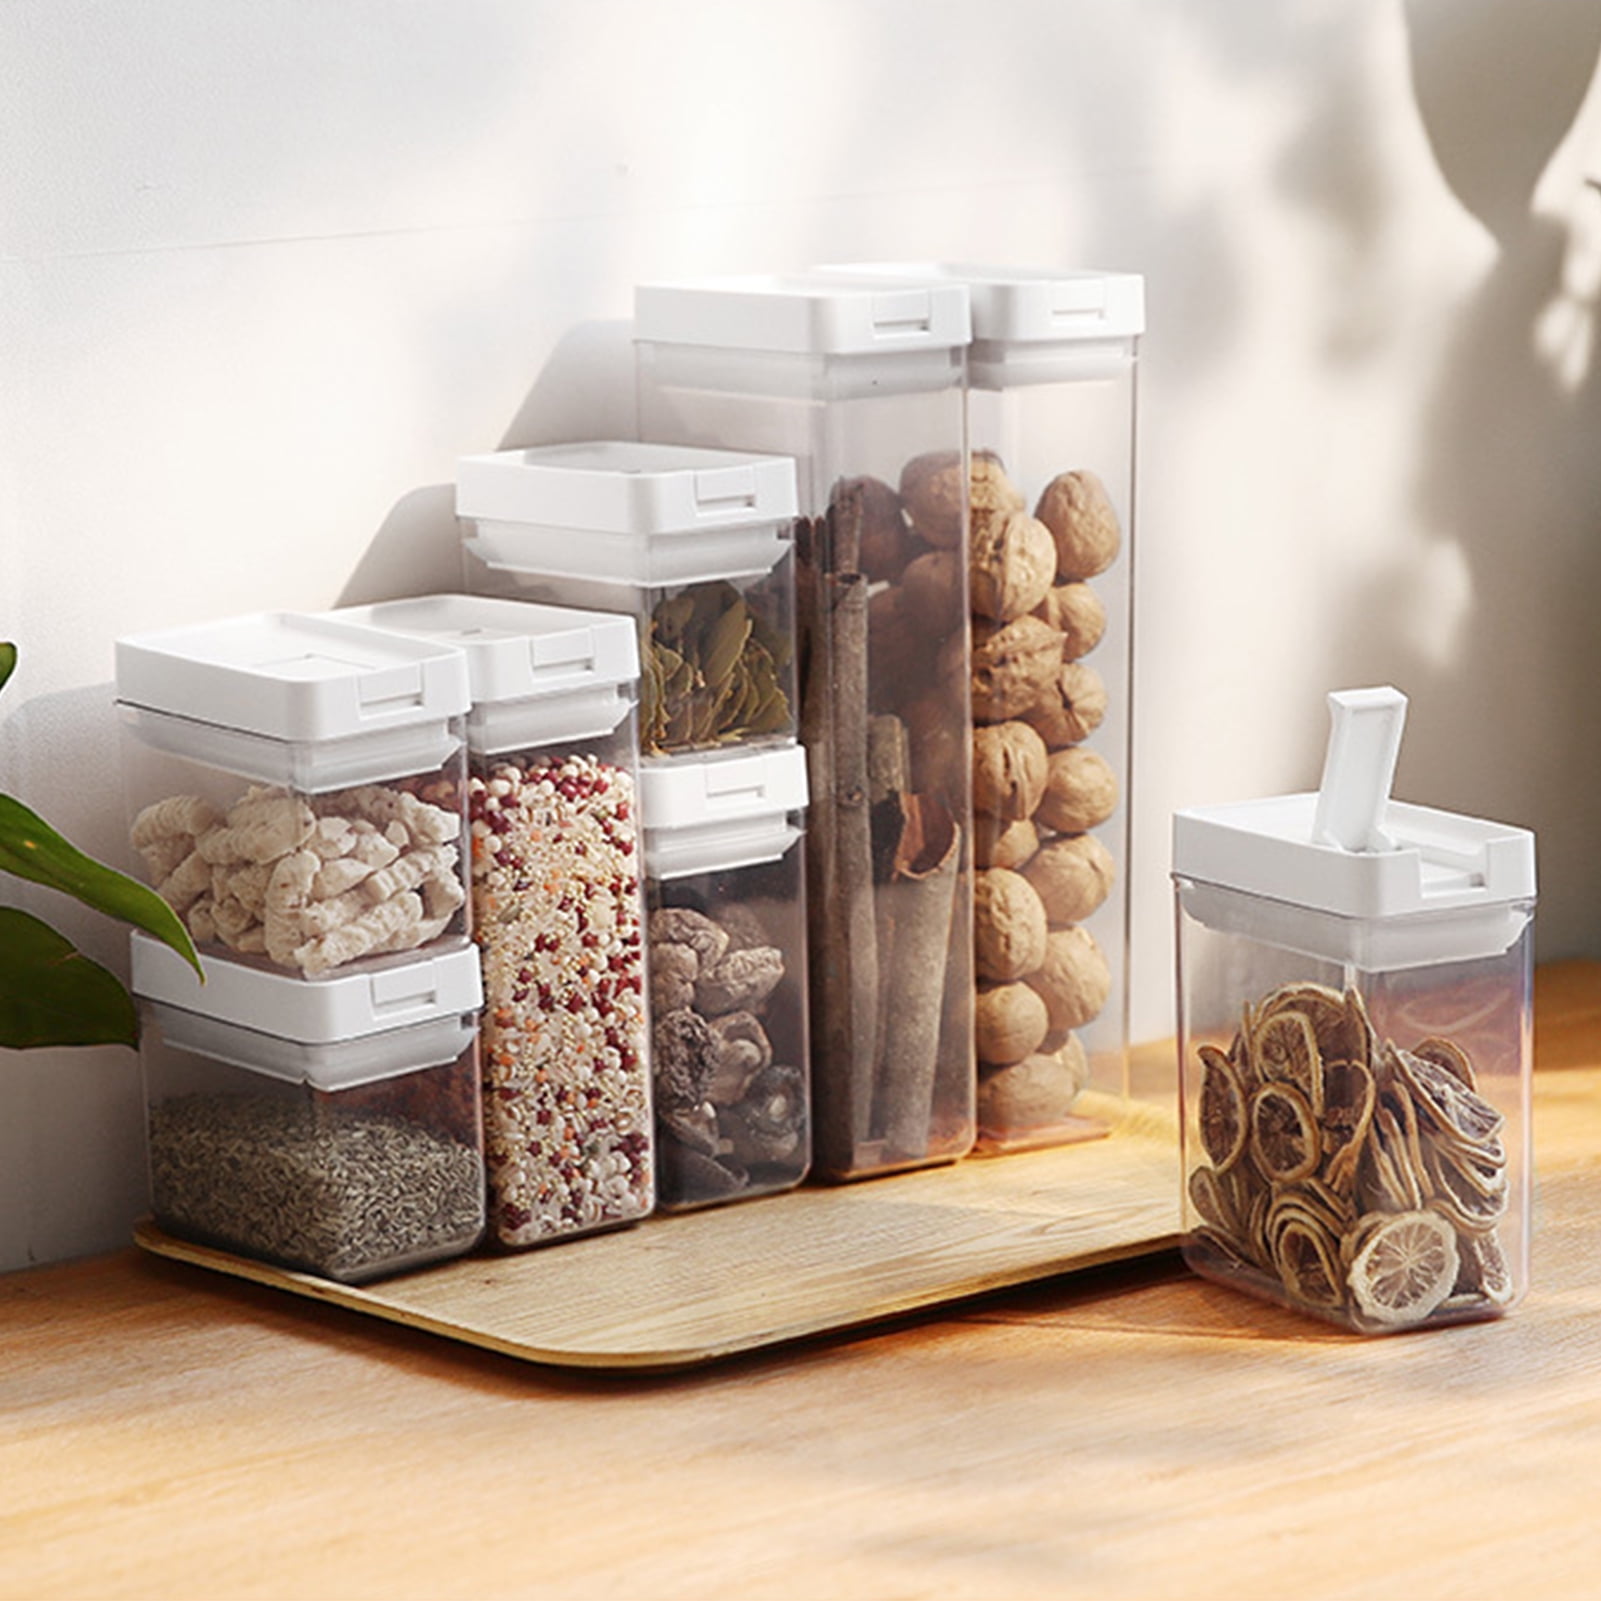  Food Storage Container Organizer 2pc - Lid Organizer Box -  Adjustable Kitchen Organizing Box - Compatible with Tupperware Glad  Rubbermaid Ziploc Containers - Drawers and Cabinet Organization (2): Home &  Kitchen